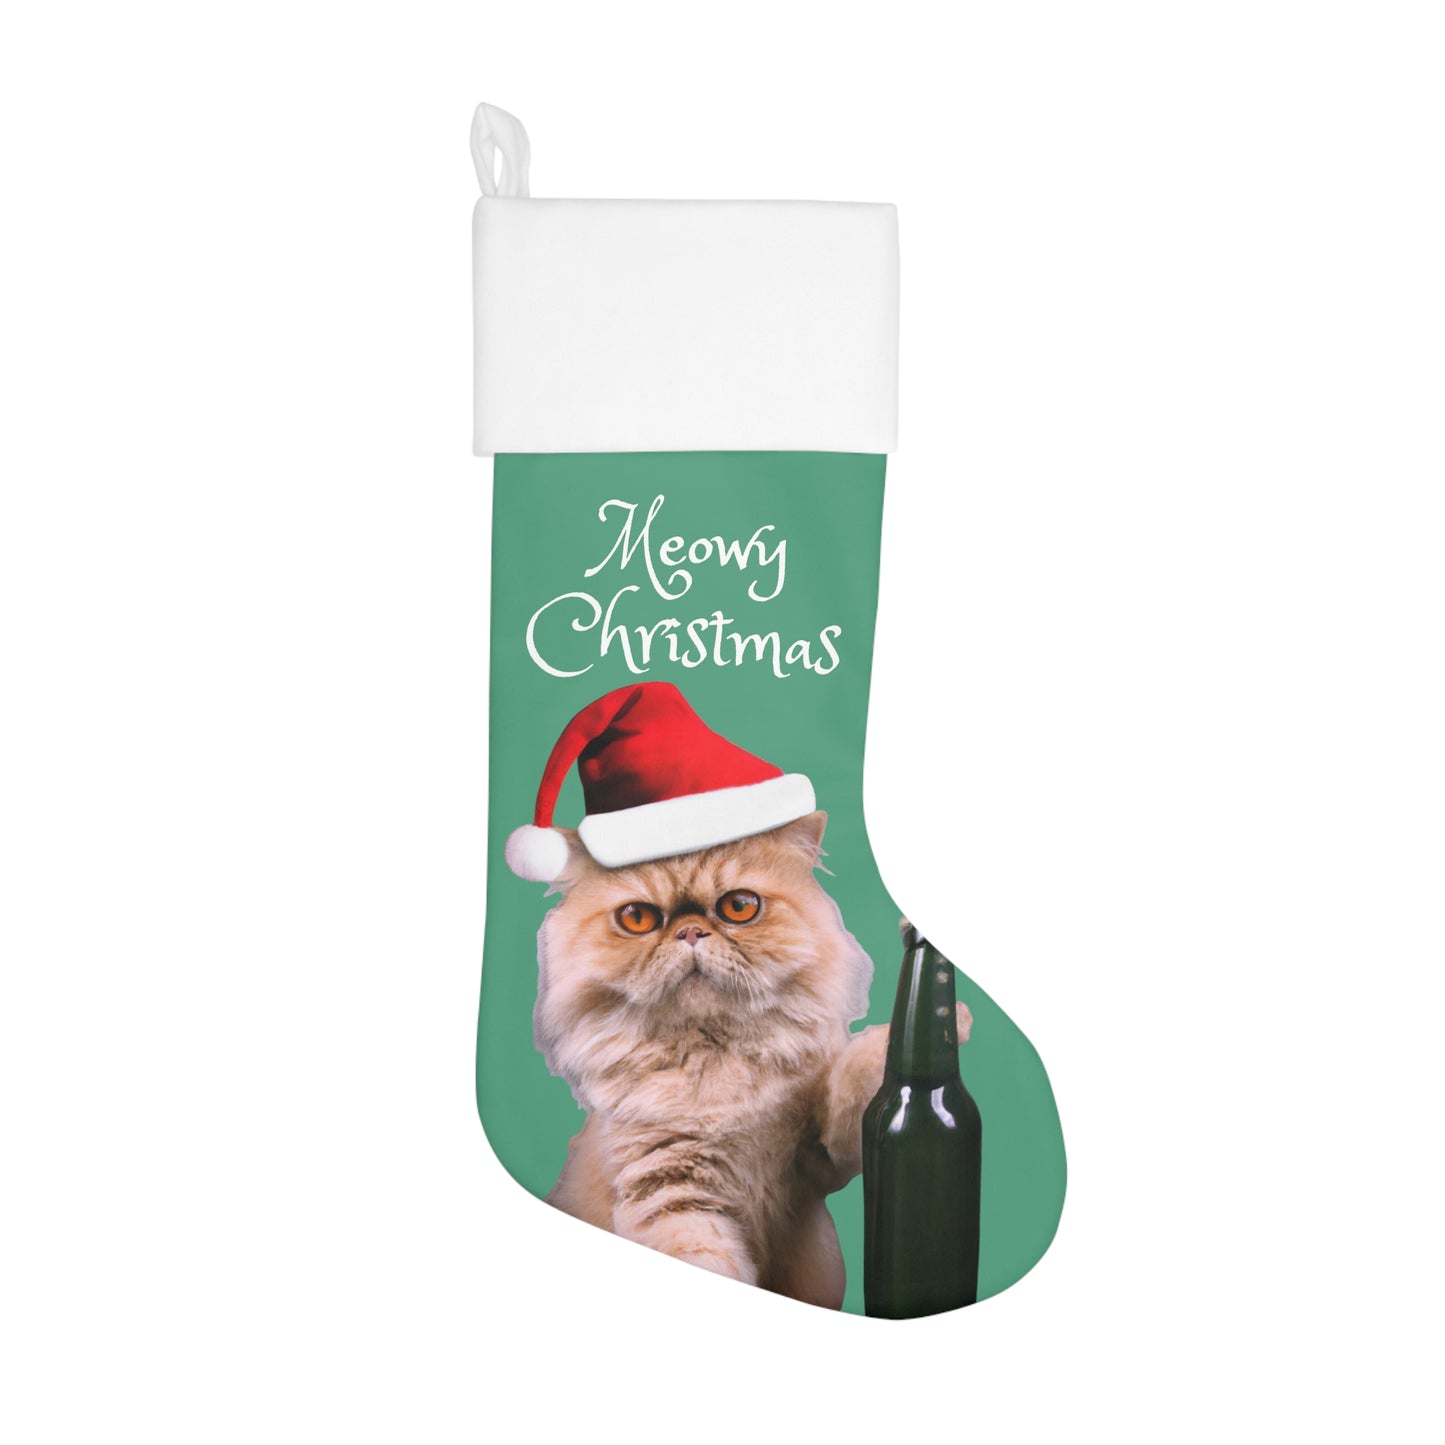 Drunk Persian cat Merry Xmas Stocking, Funny cat with red Santa's hat Christmas Holiday Stocking, Cat and beer bottle Merry Christmas decor